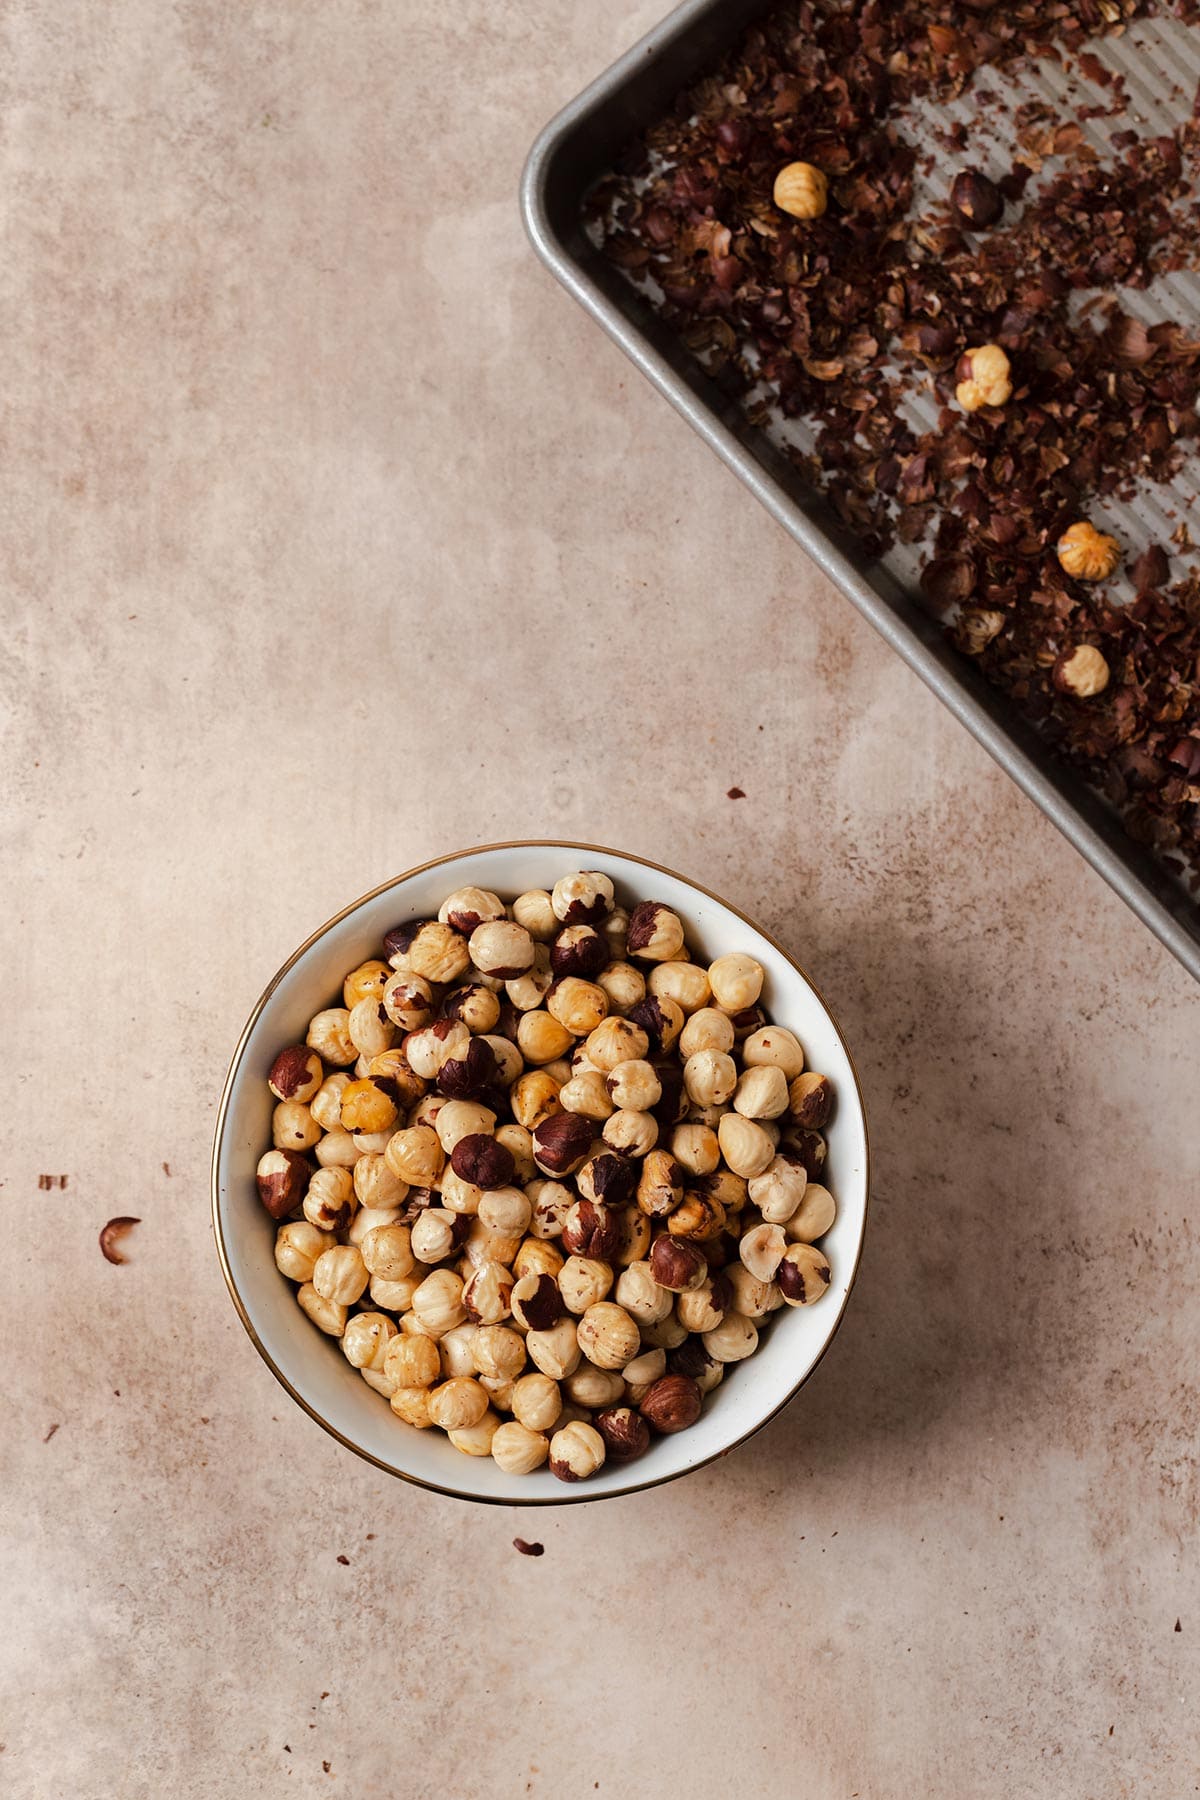 Roasted hazelnuts in a white bowl on a beige background with the baking sheet in the top right corner.